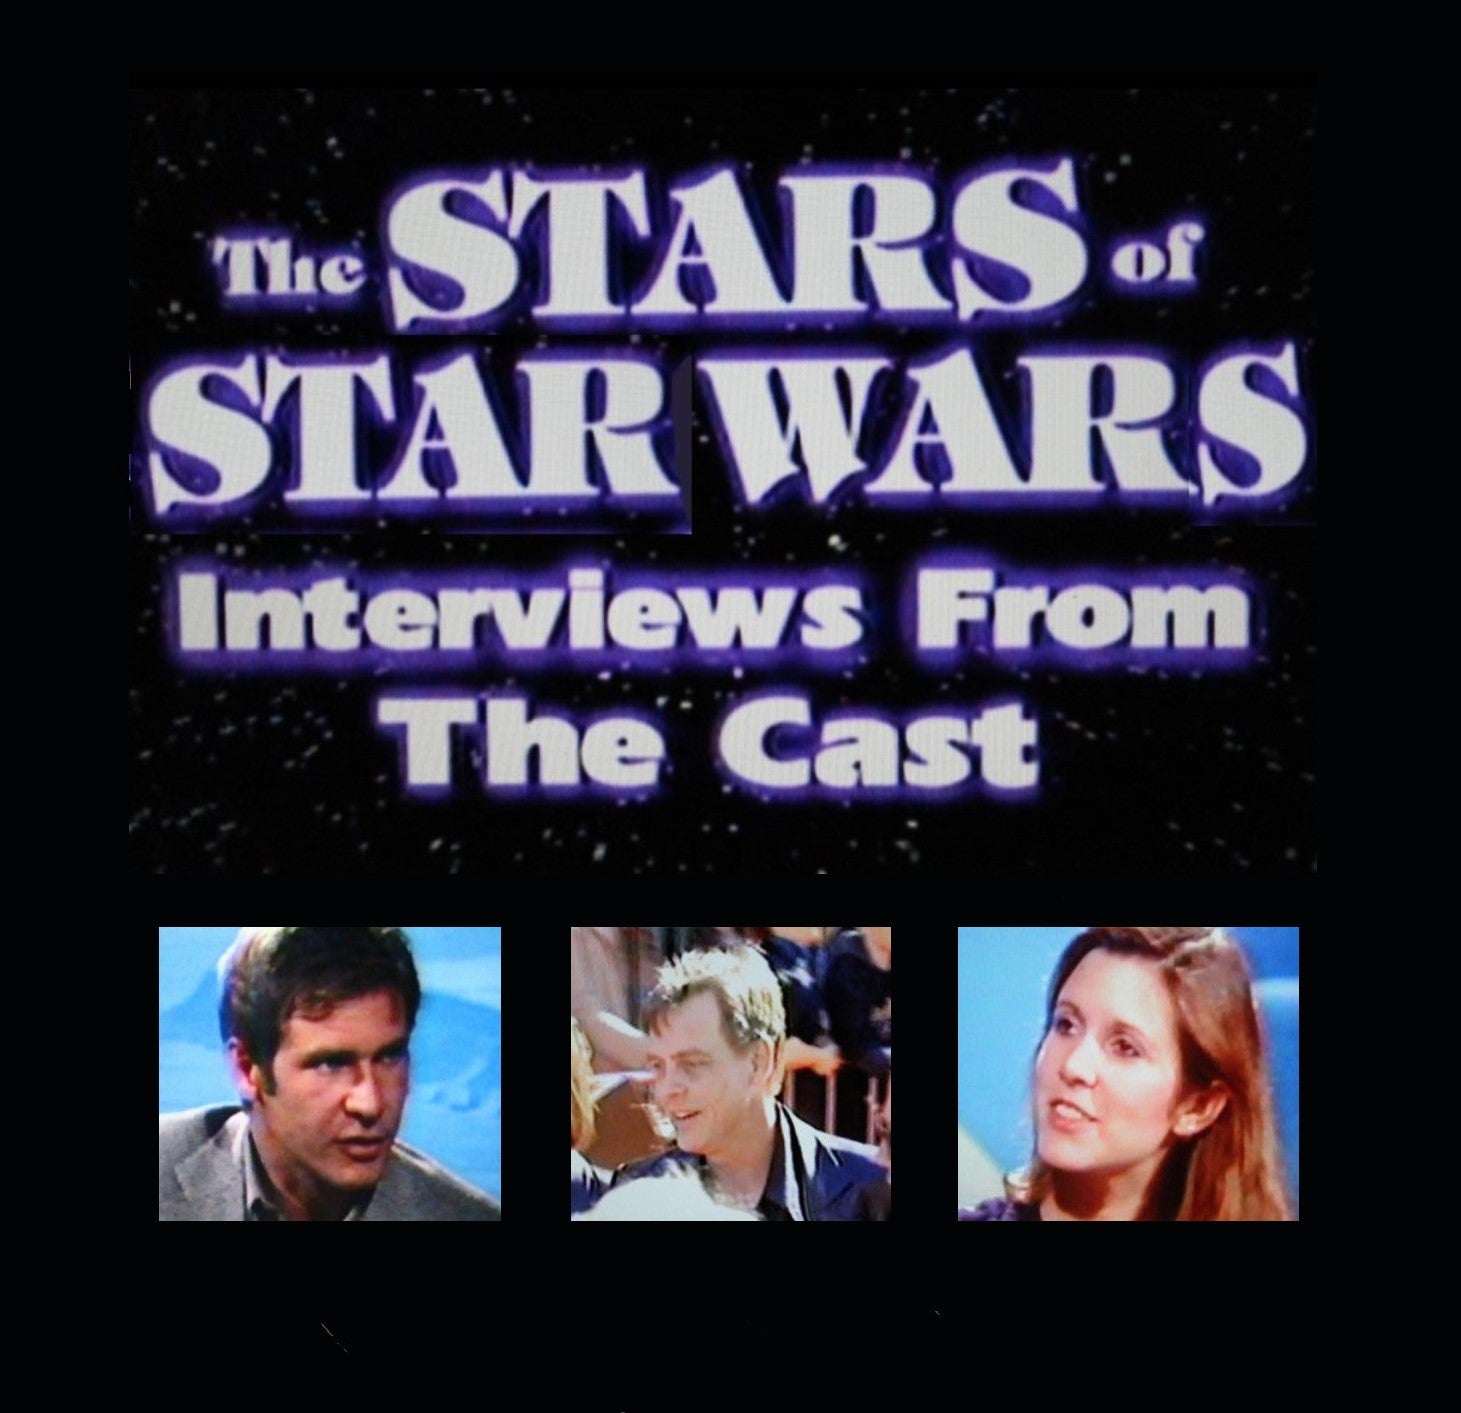 THE STARS OF STAR WARS: INTERVIEWS FROM THE CAST (1999)